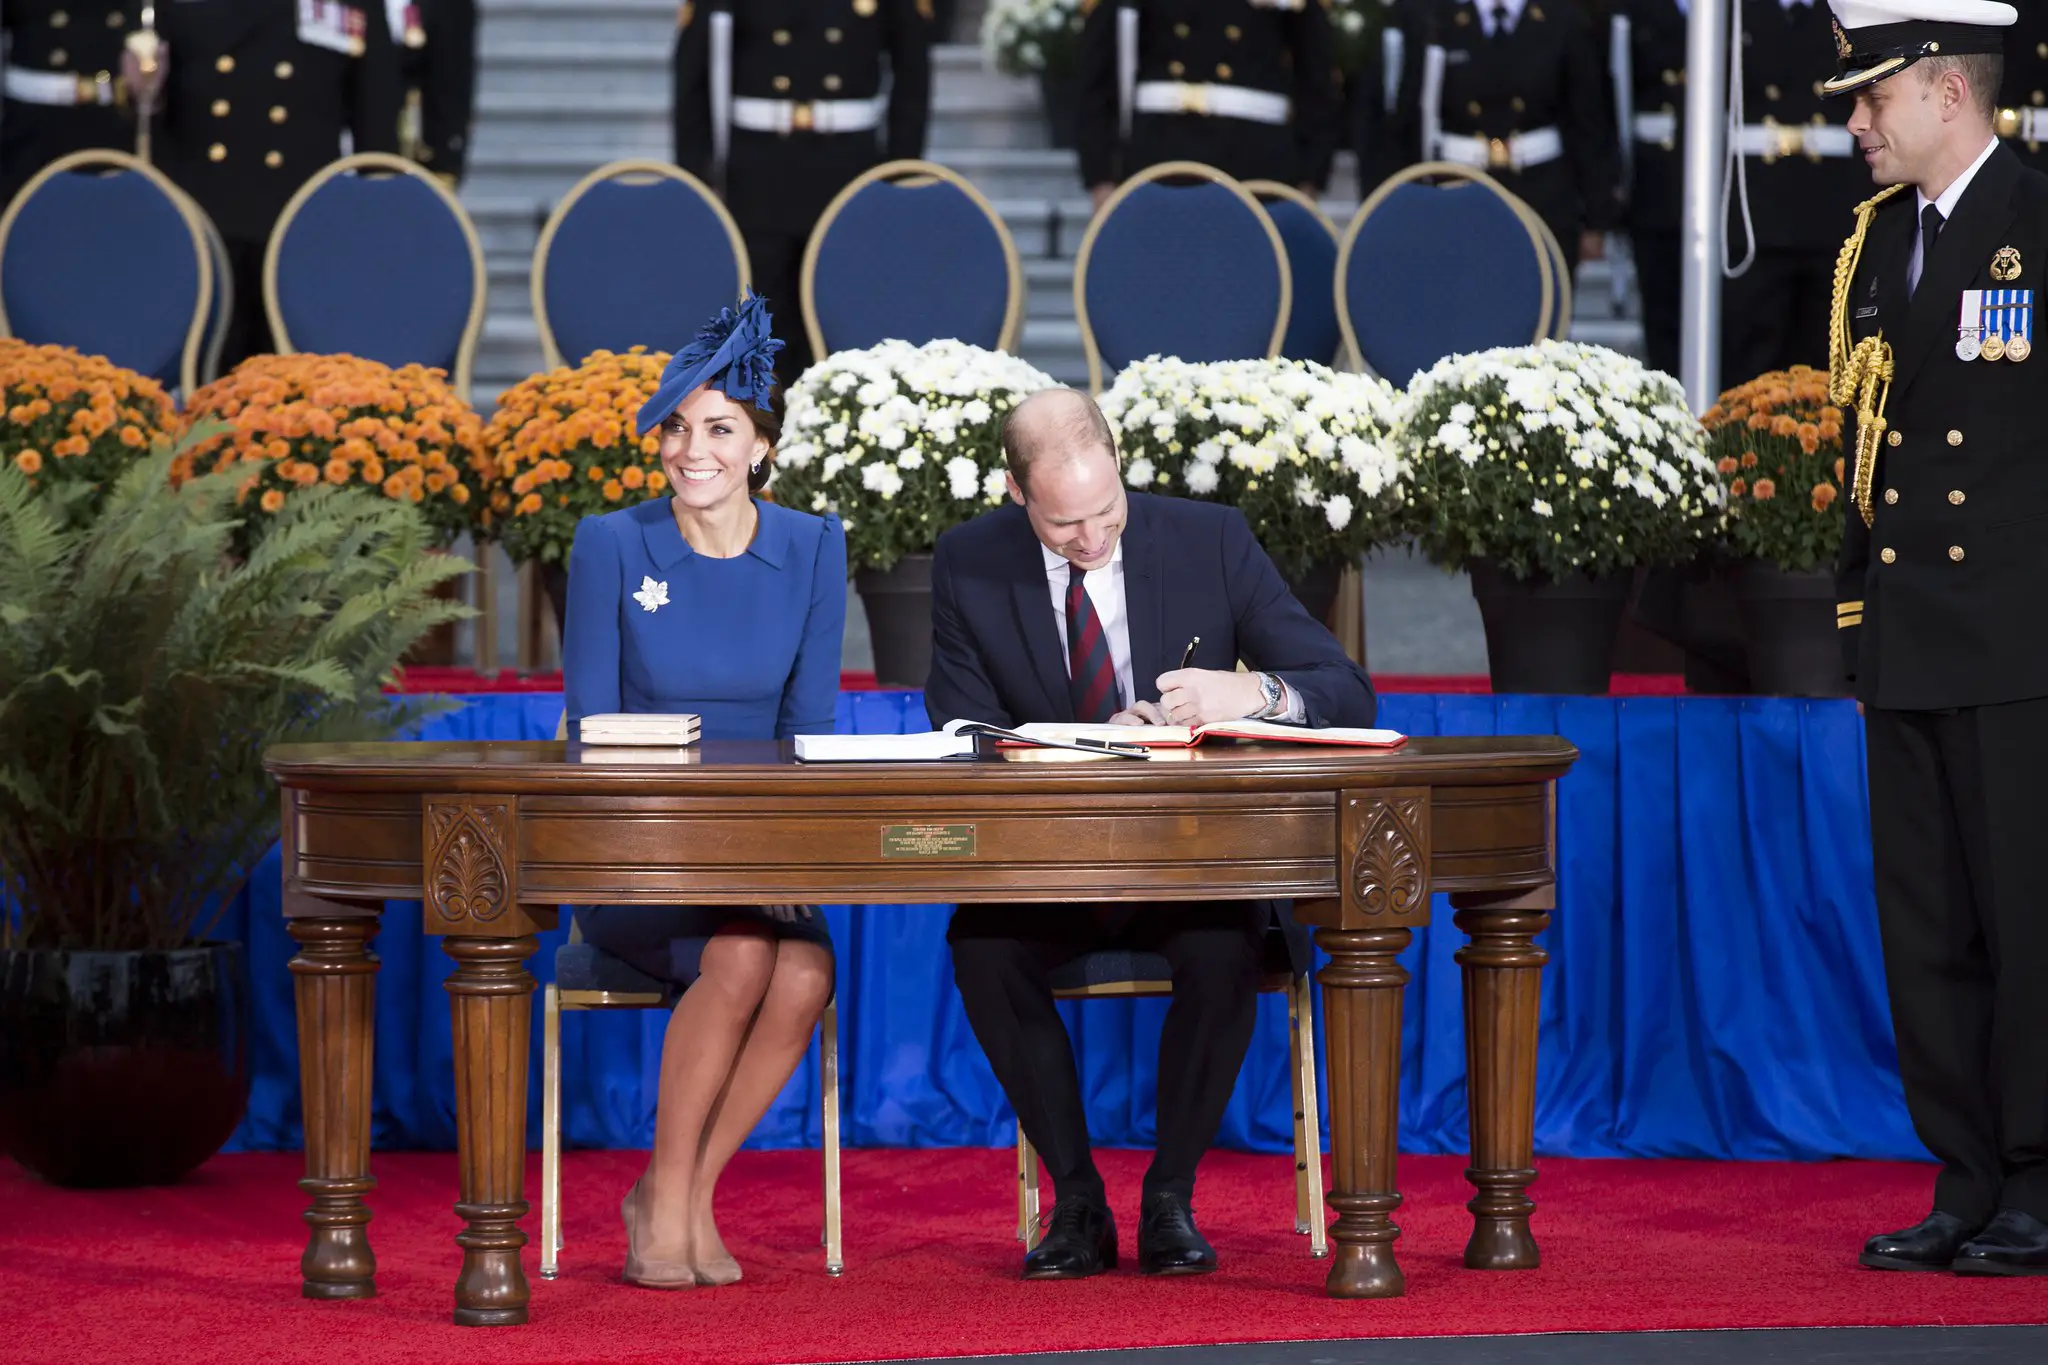 The Duke and Duchess of Cambridge signed visitor's book in canada in 2016